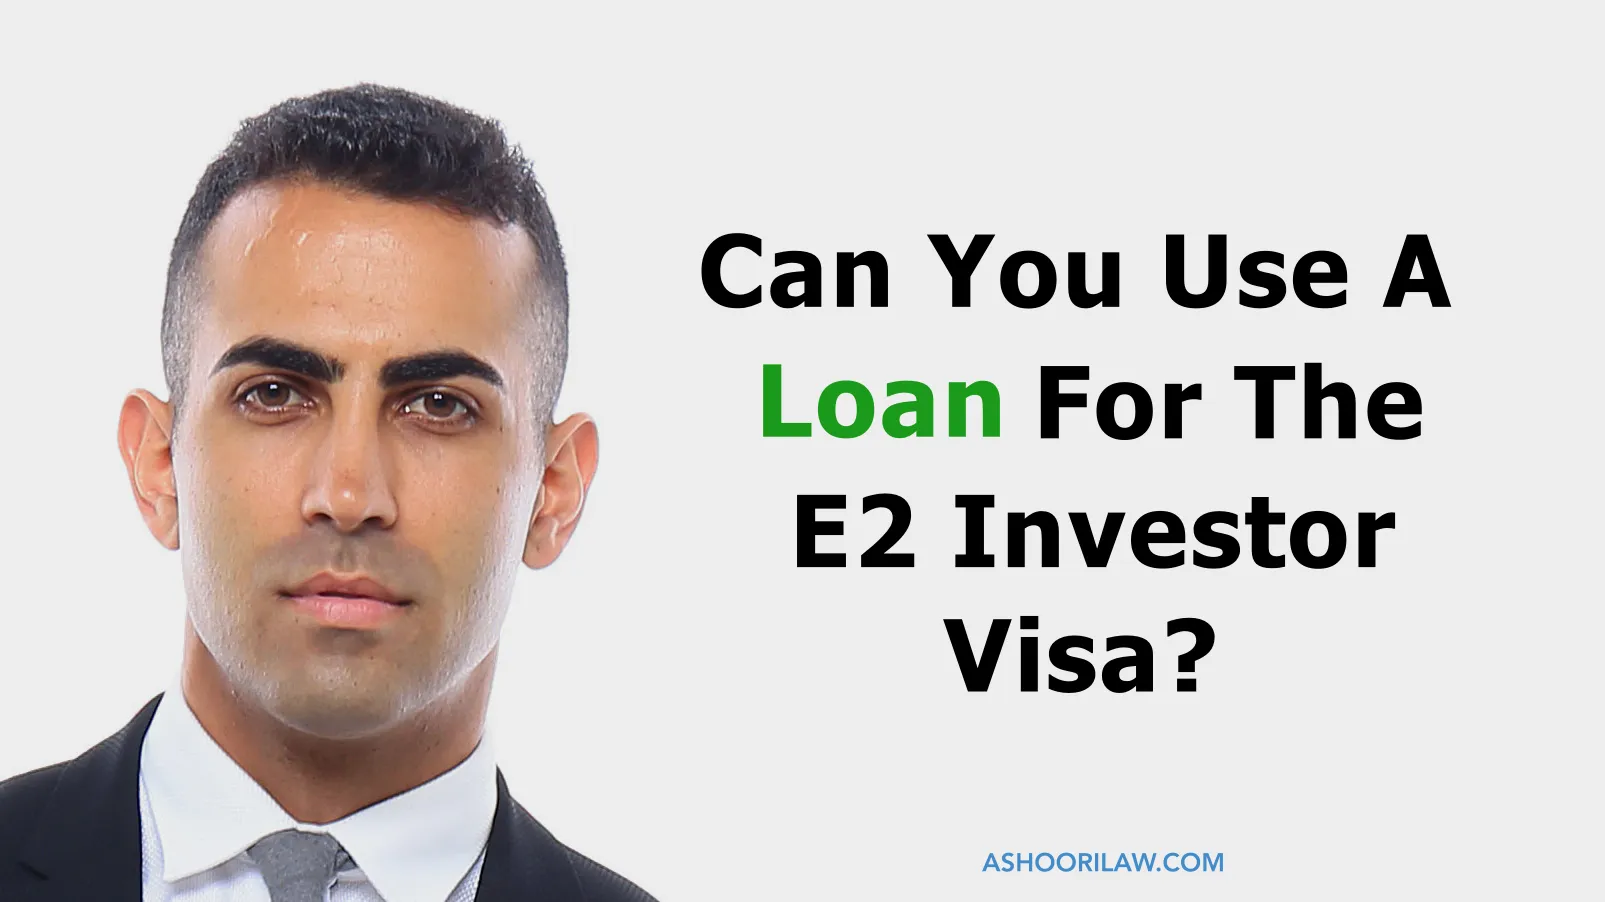 Can You Use A Loan For The E2 Investor Visa?